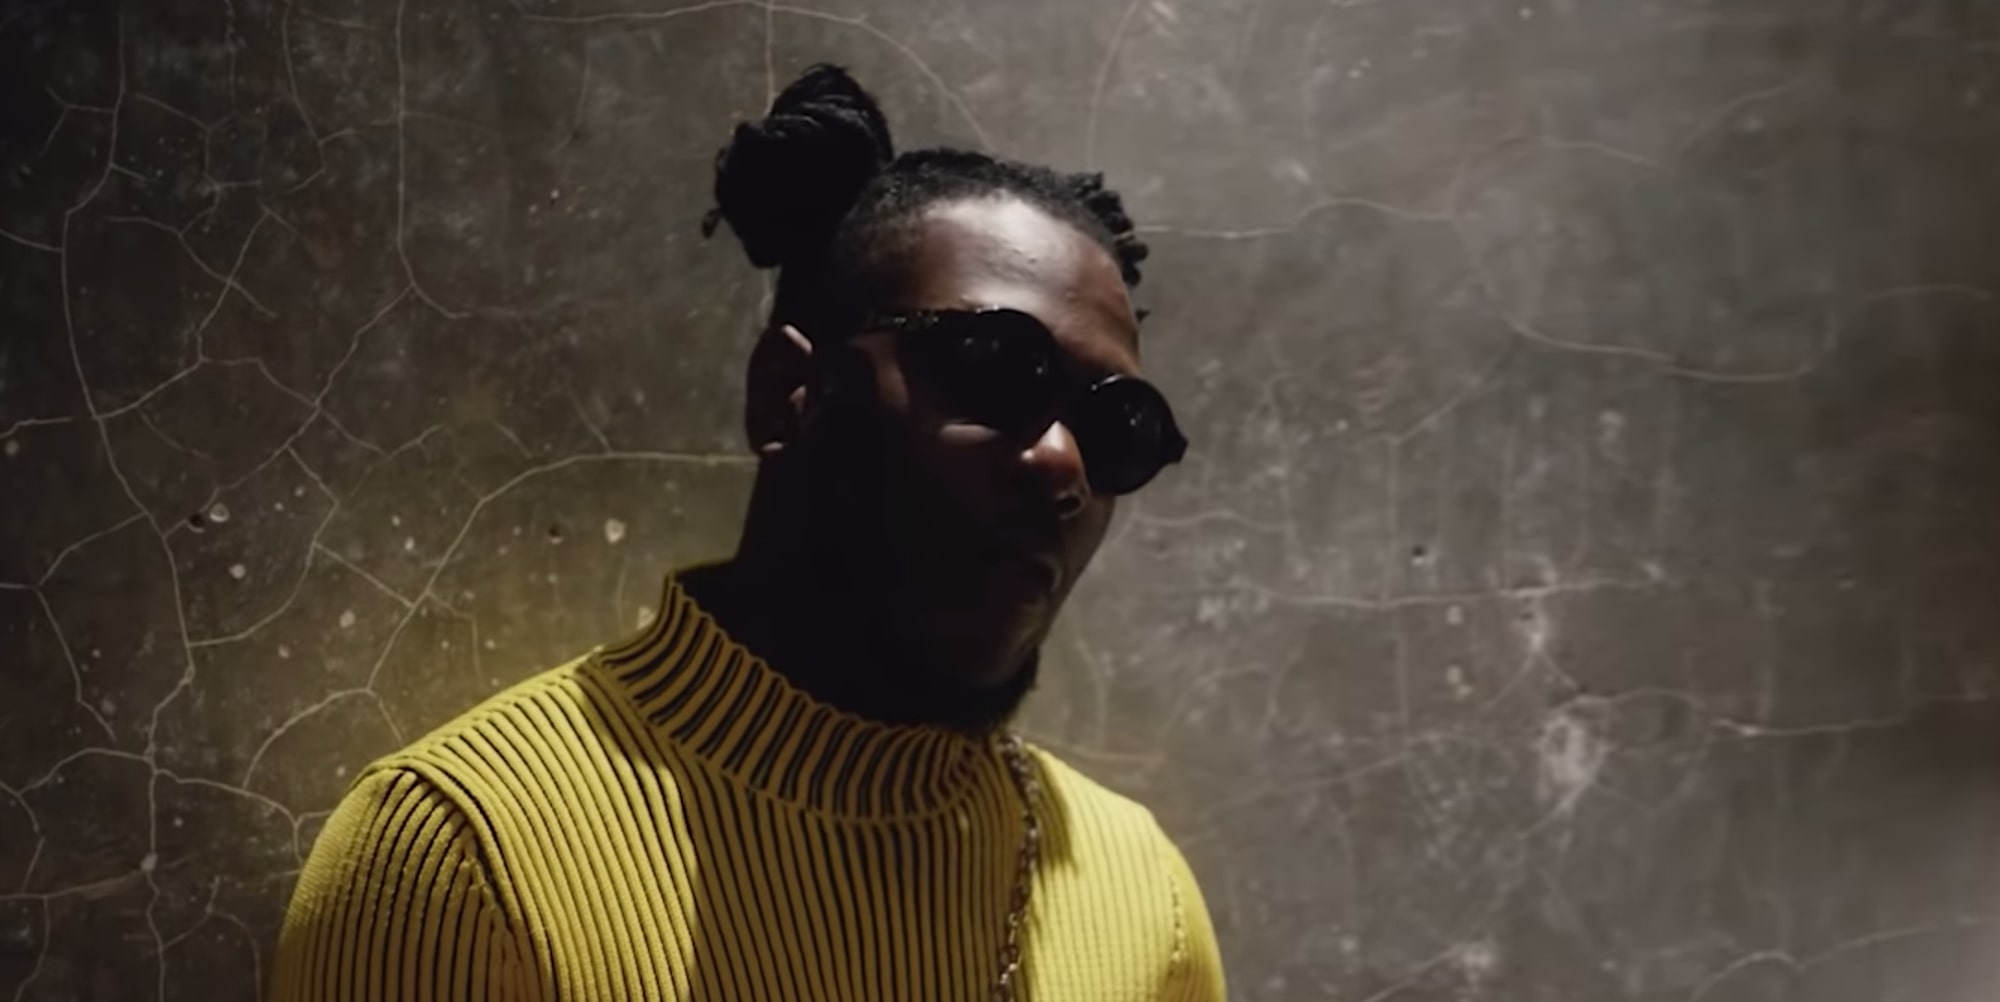 Which Burna Boy video is this from?